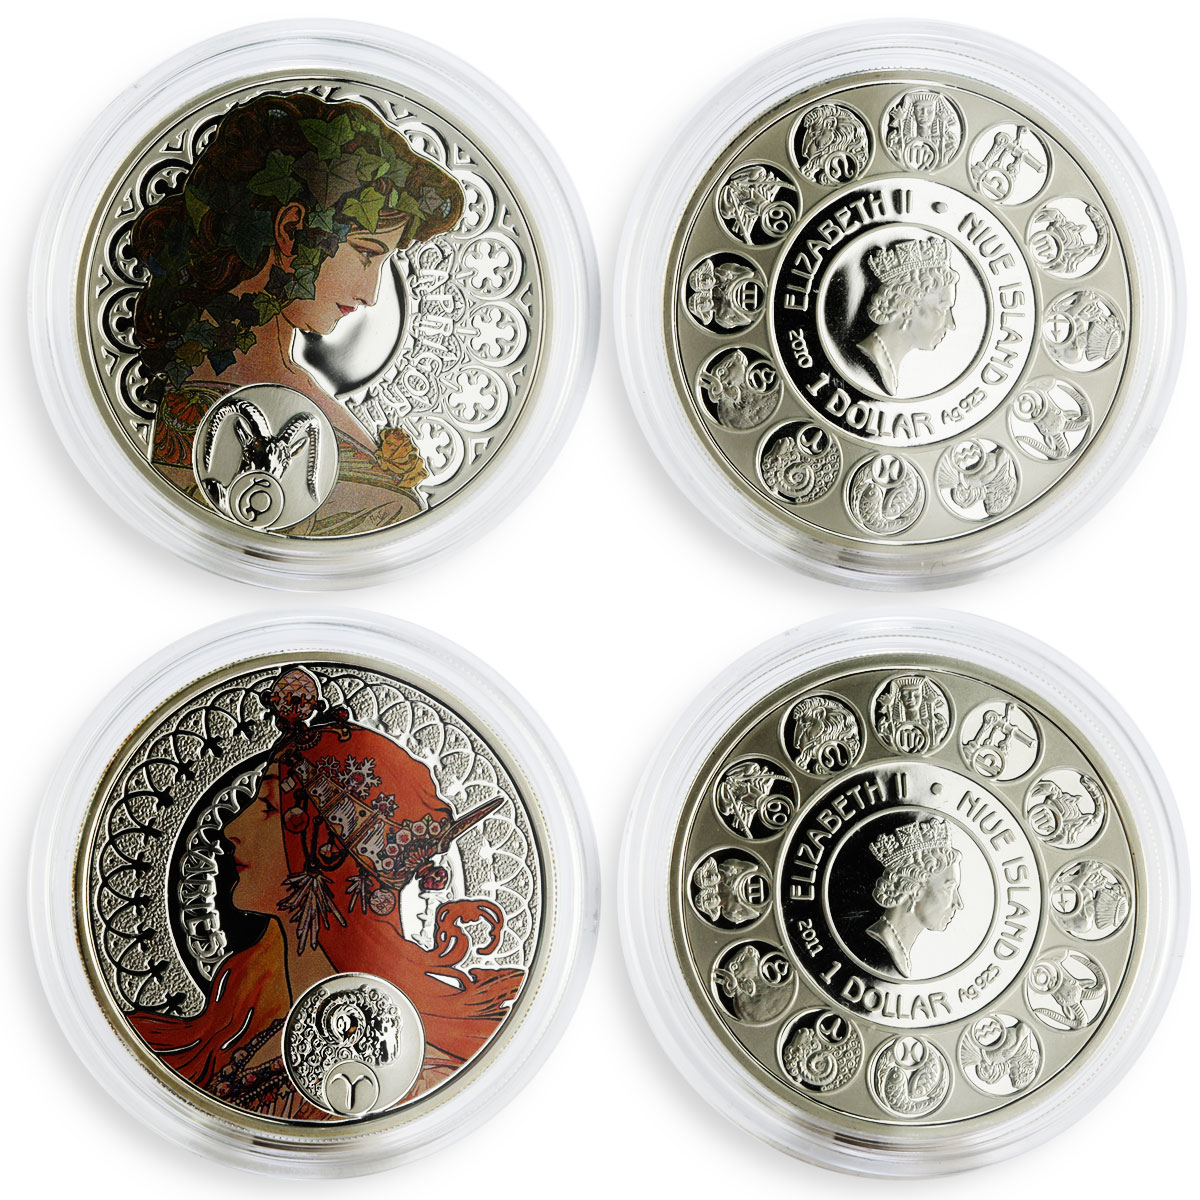 Niue set of 12 coins Zodiac Signs by A. Mucha colored silver coins 2010 - 2011